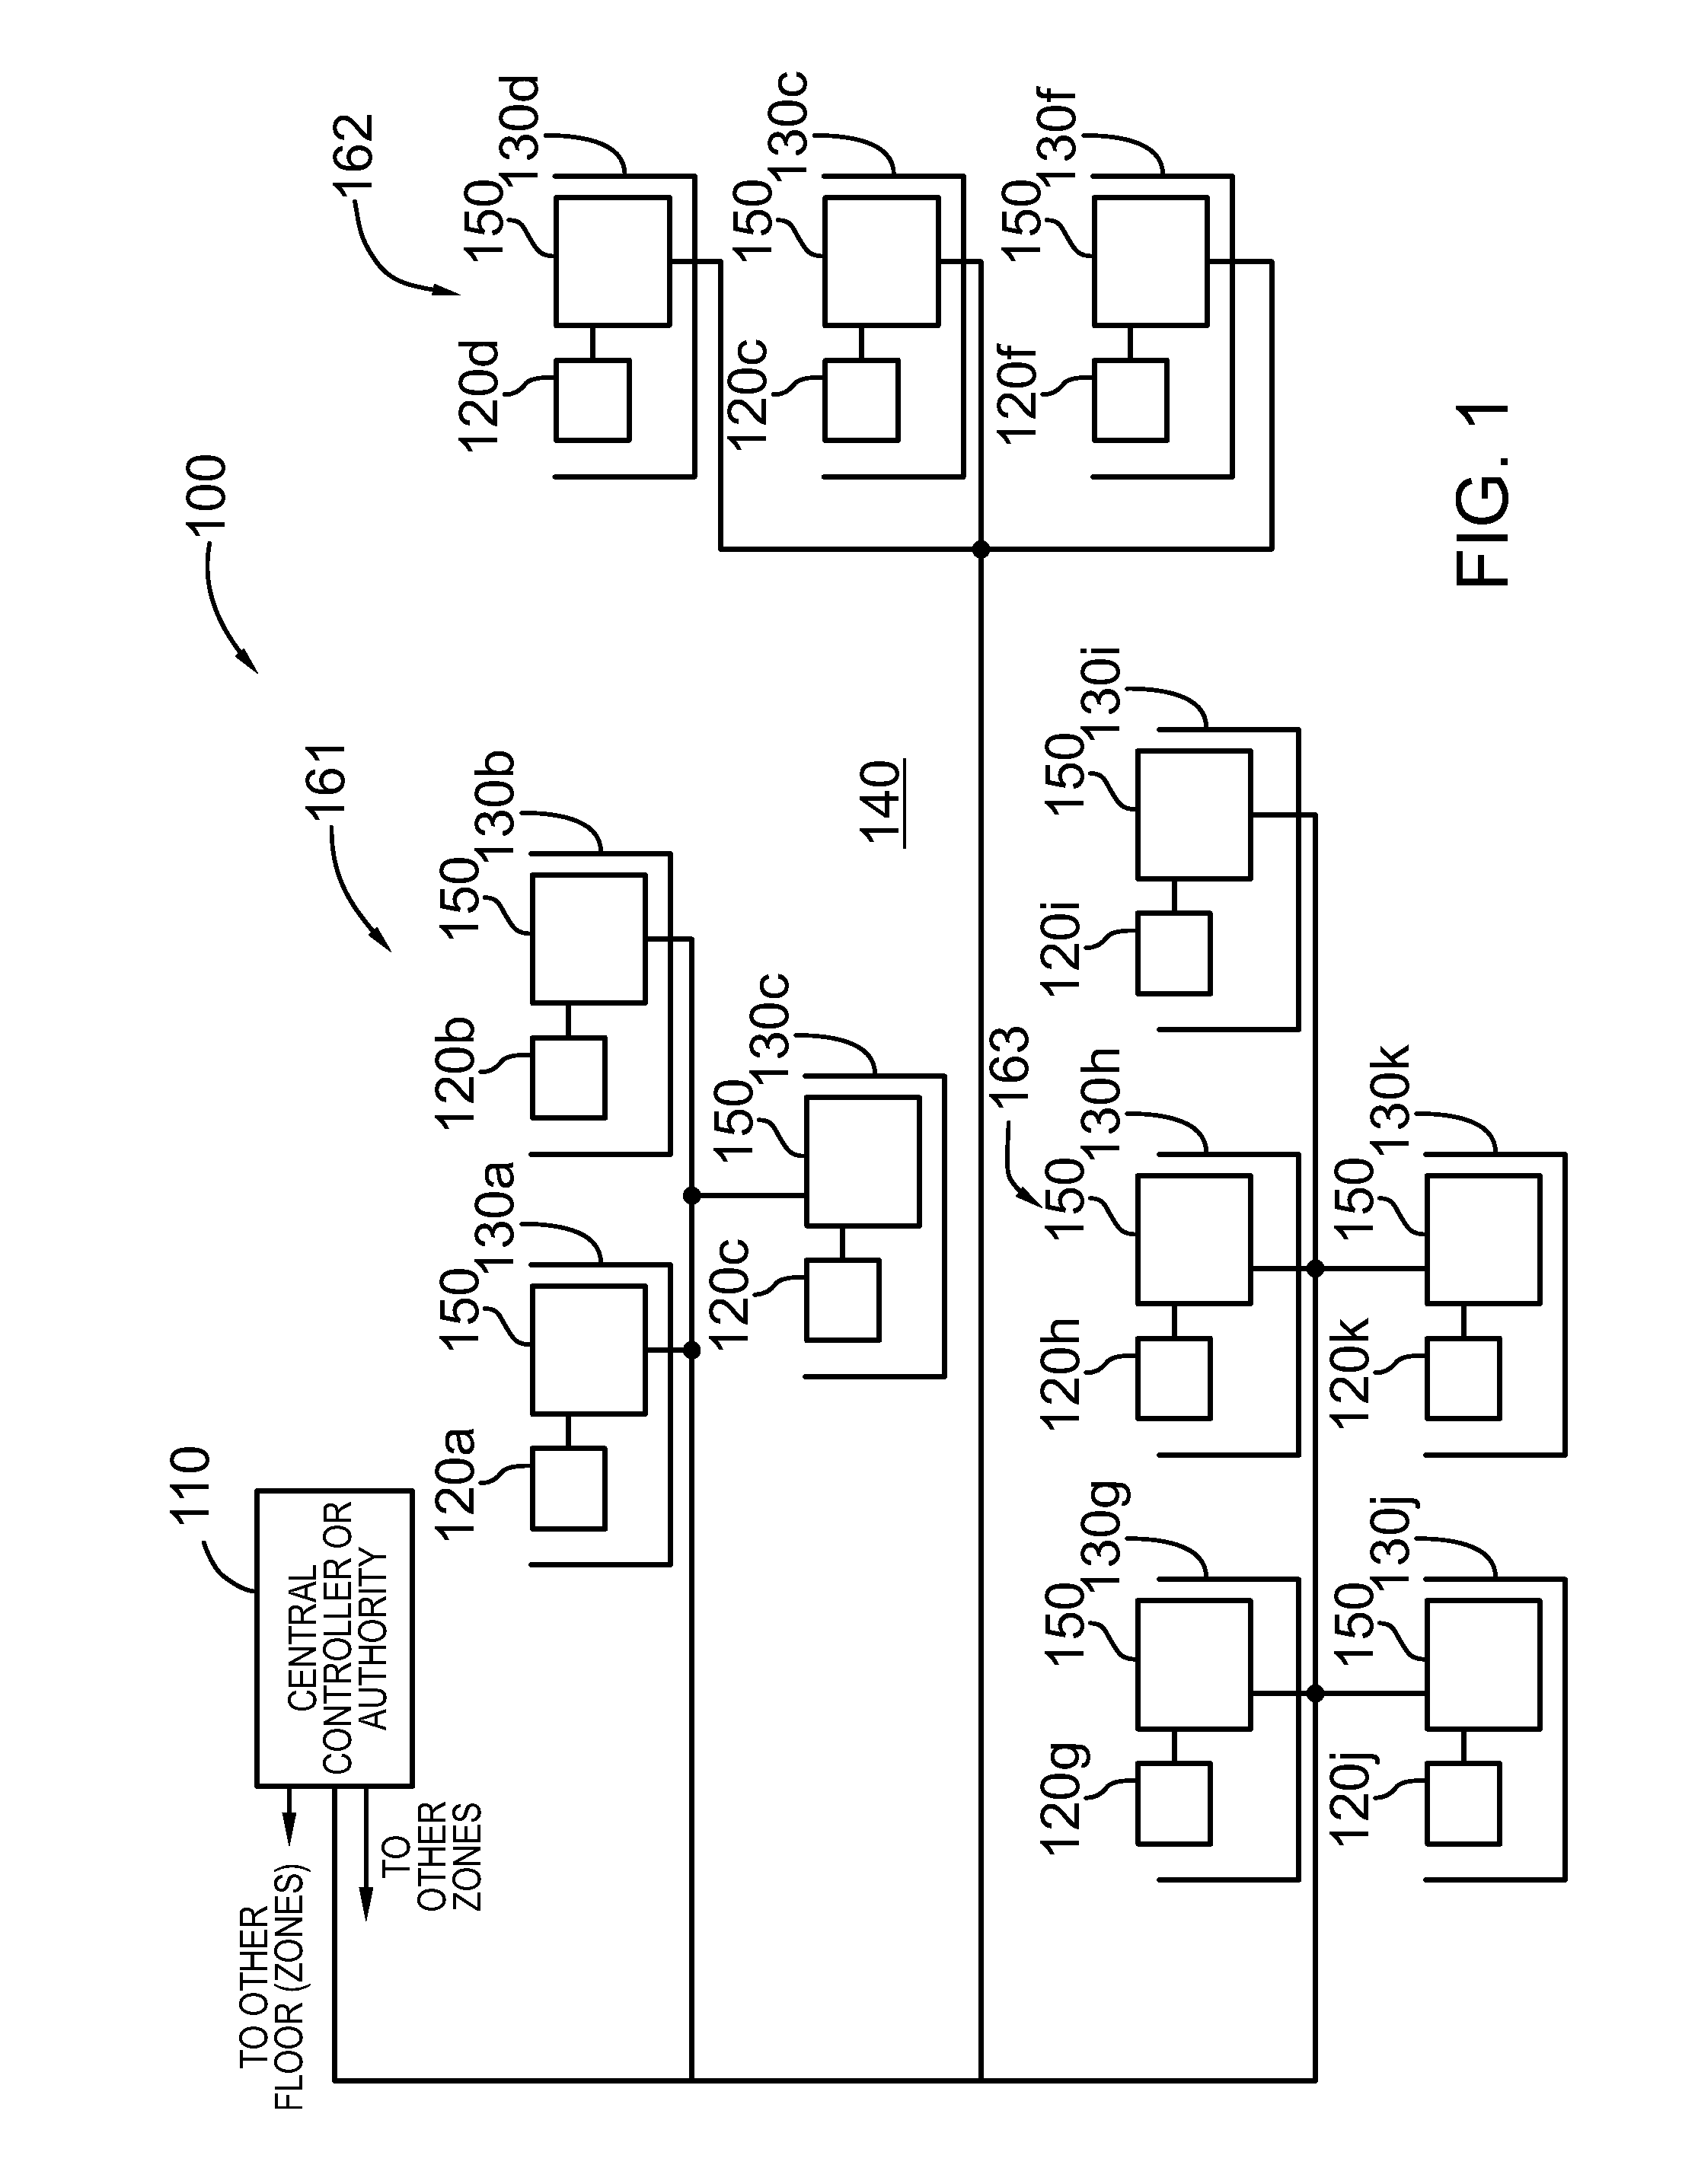 System and method for a sound masking system for networked workstations or offices